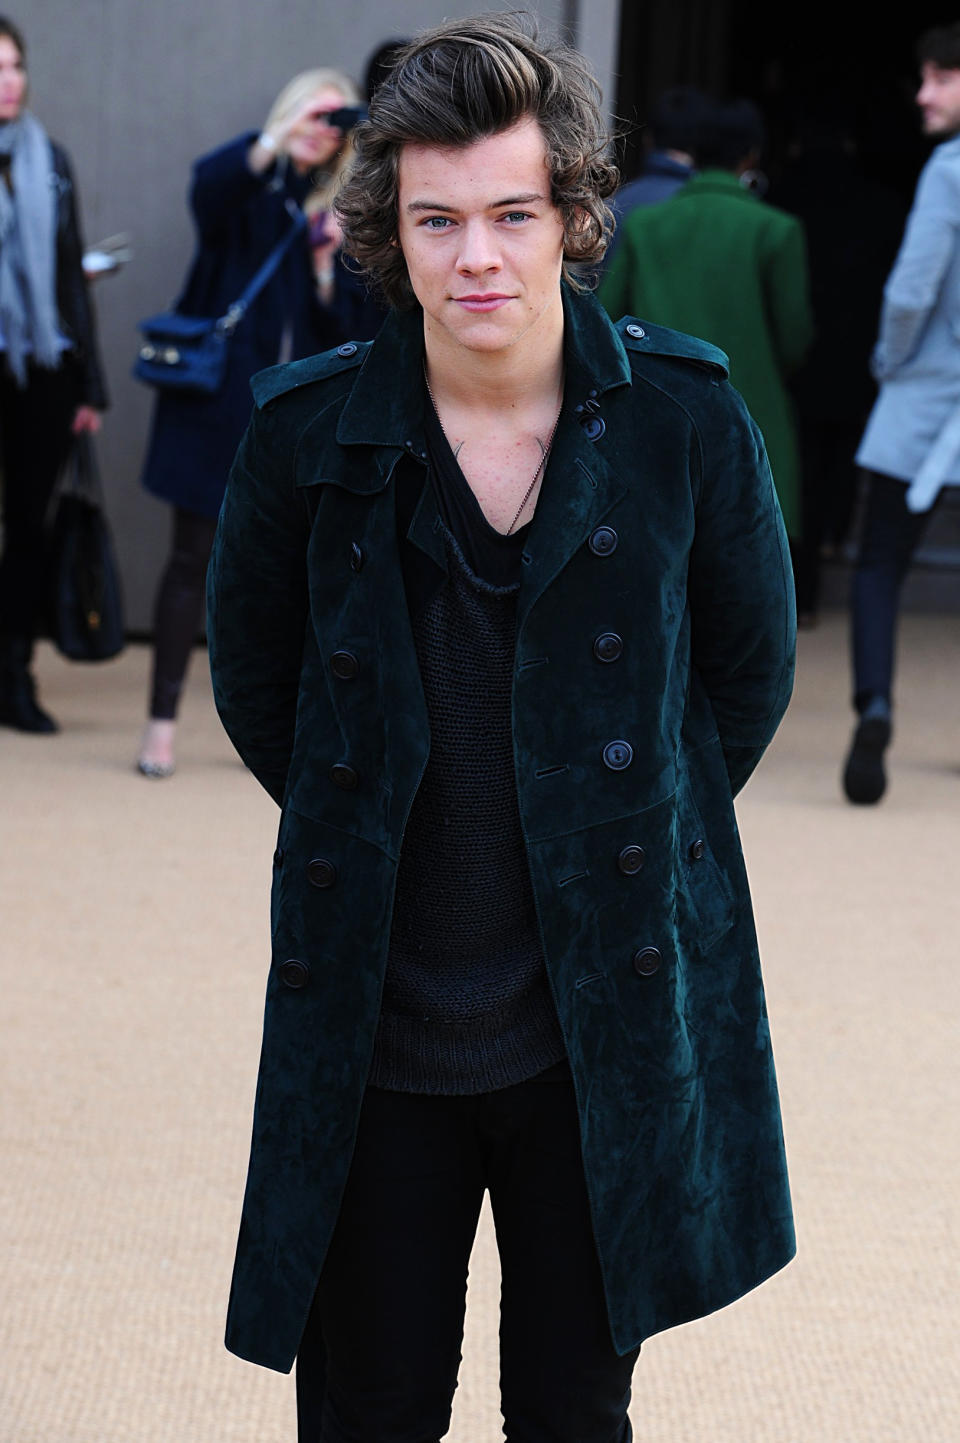 One Direction's Harry Styles arrives for the Burberry Prorsum autumn/winter 2014 London Fashion Week show at Kensington Gardens, London Monday Feb. 17, 2014. (AP Photo/ Ian West/PA) UNITED KINGDOM OUT